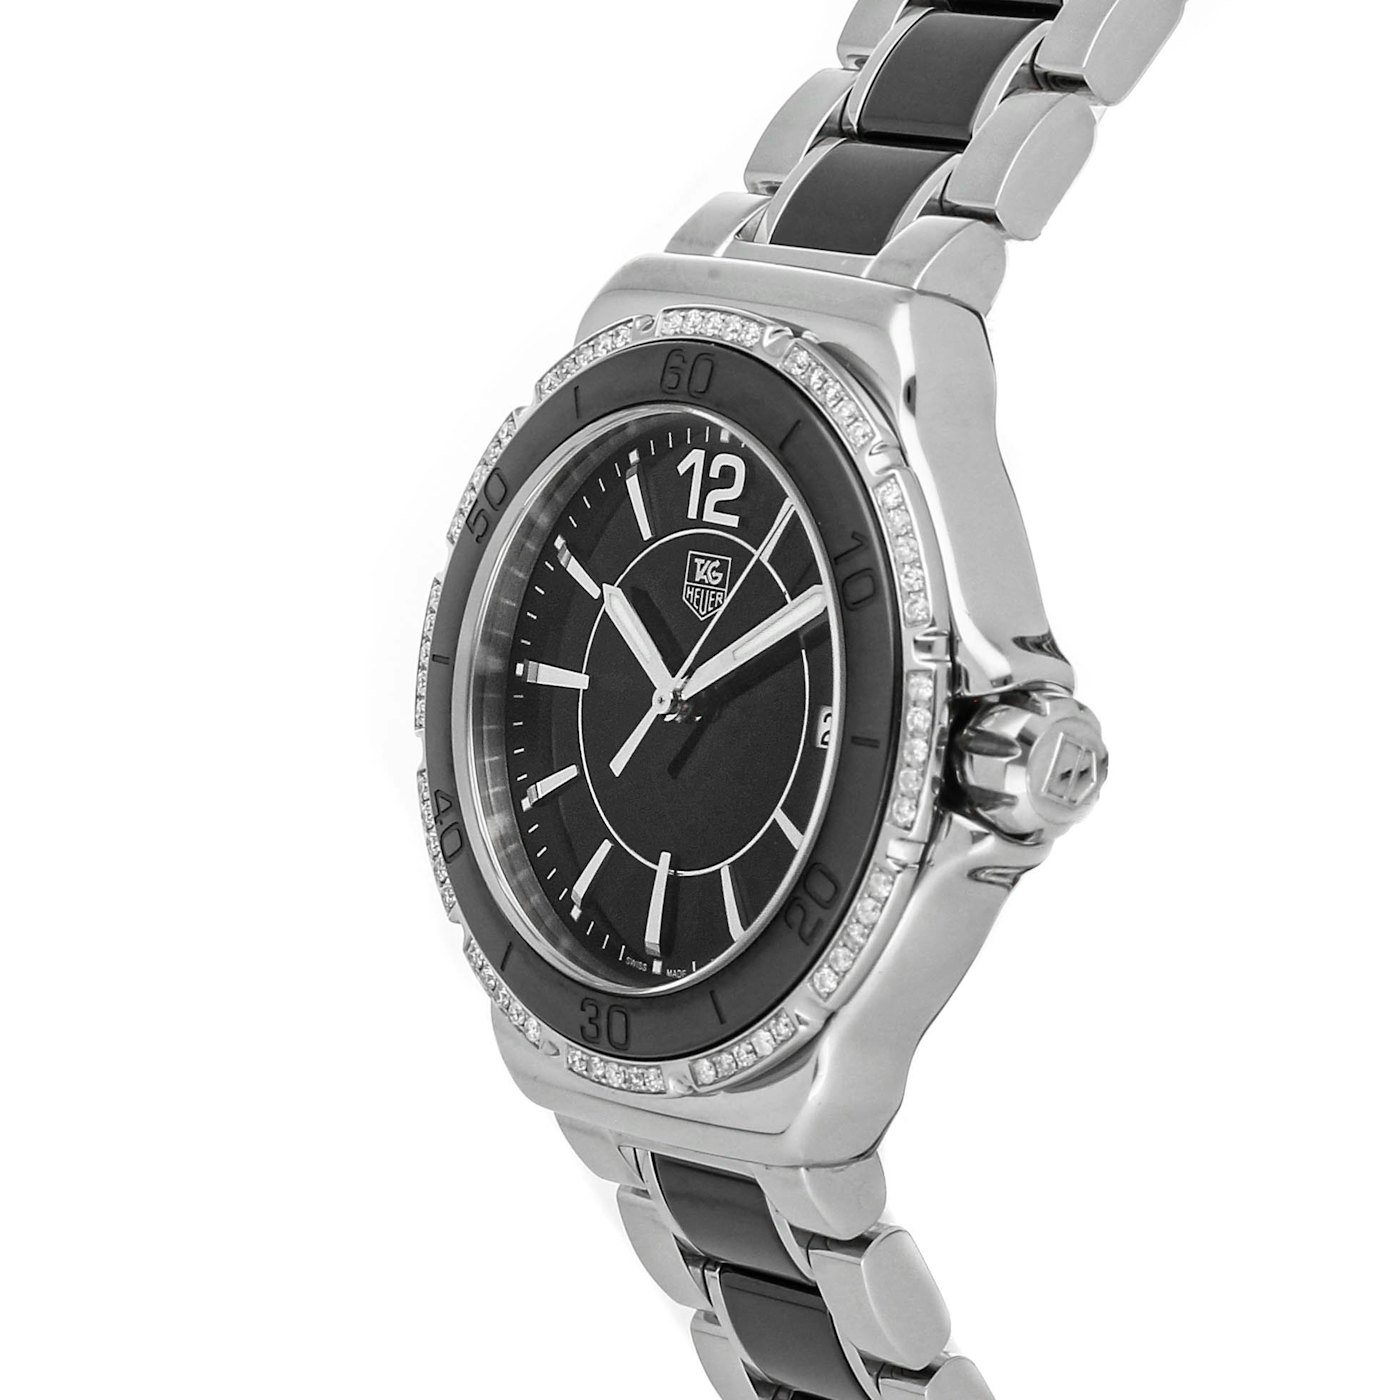 Tag Heuer Wah1212 Cheapest Online Save 43 Jlcatj gob mx